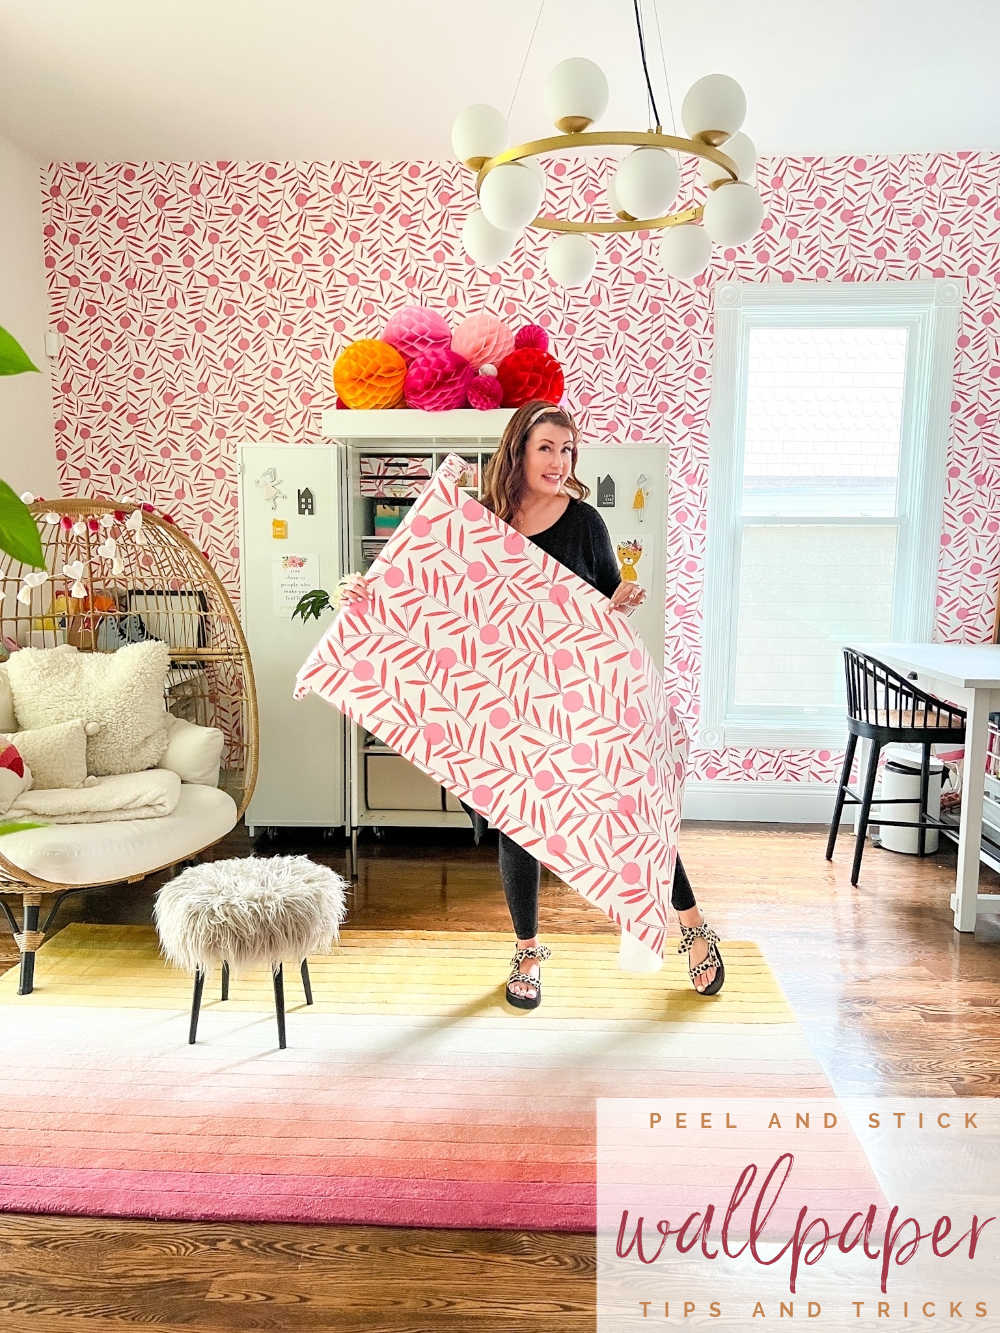 How to Hang Peel and Stick Wallpaper. Peel and stick wallpaper can transform a wall in no time and to make it easier, I am sharing my favorite tips and tricks to make it easy for you to do!